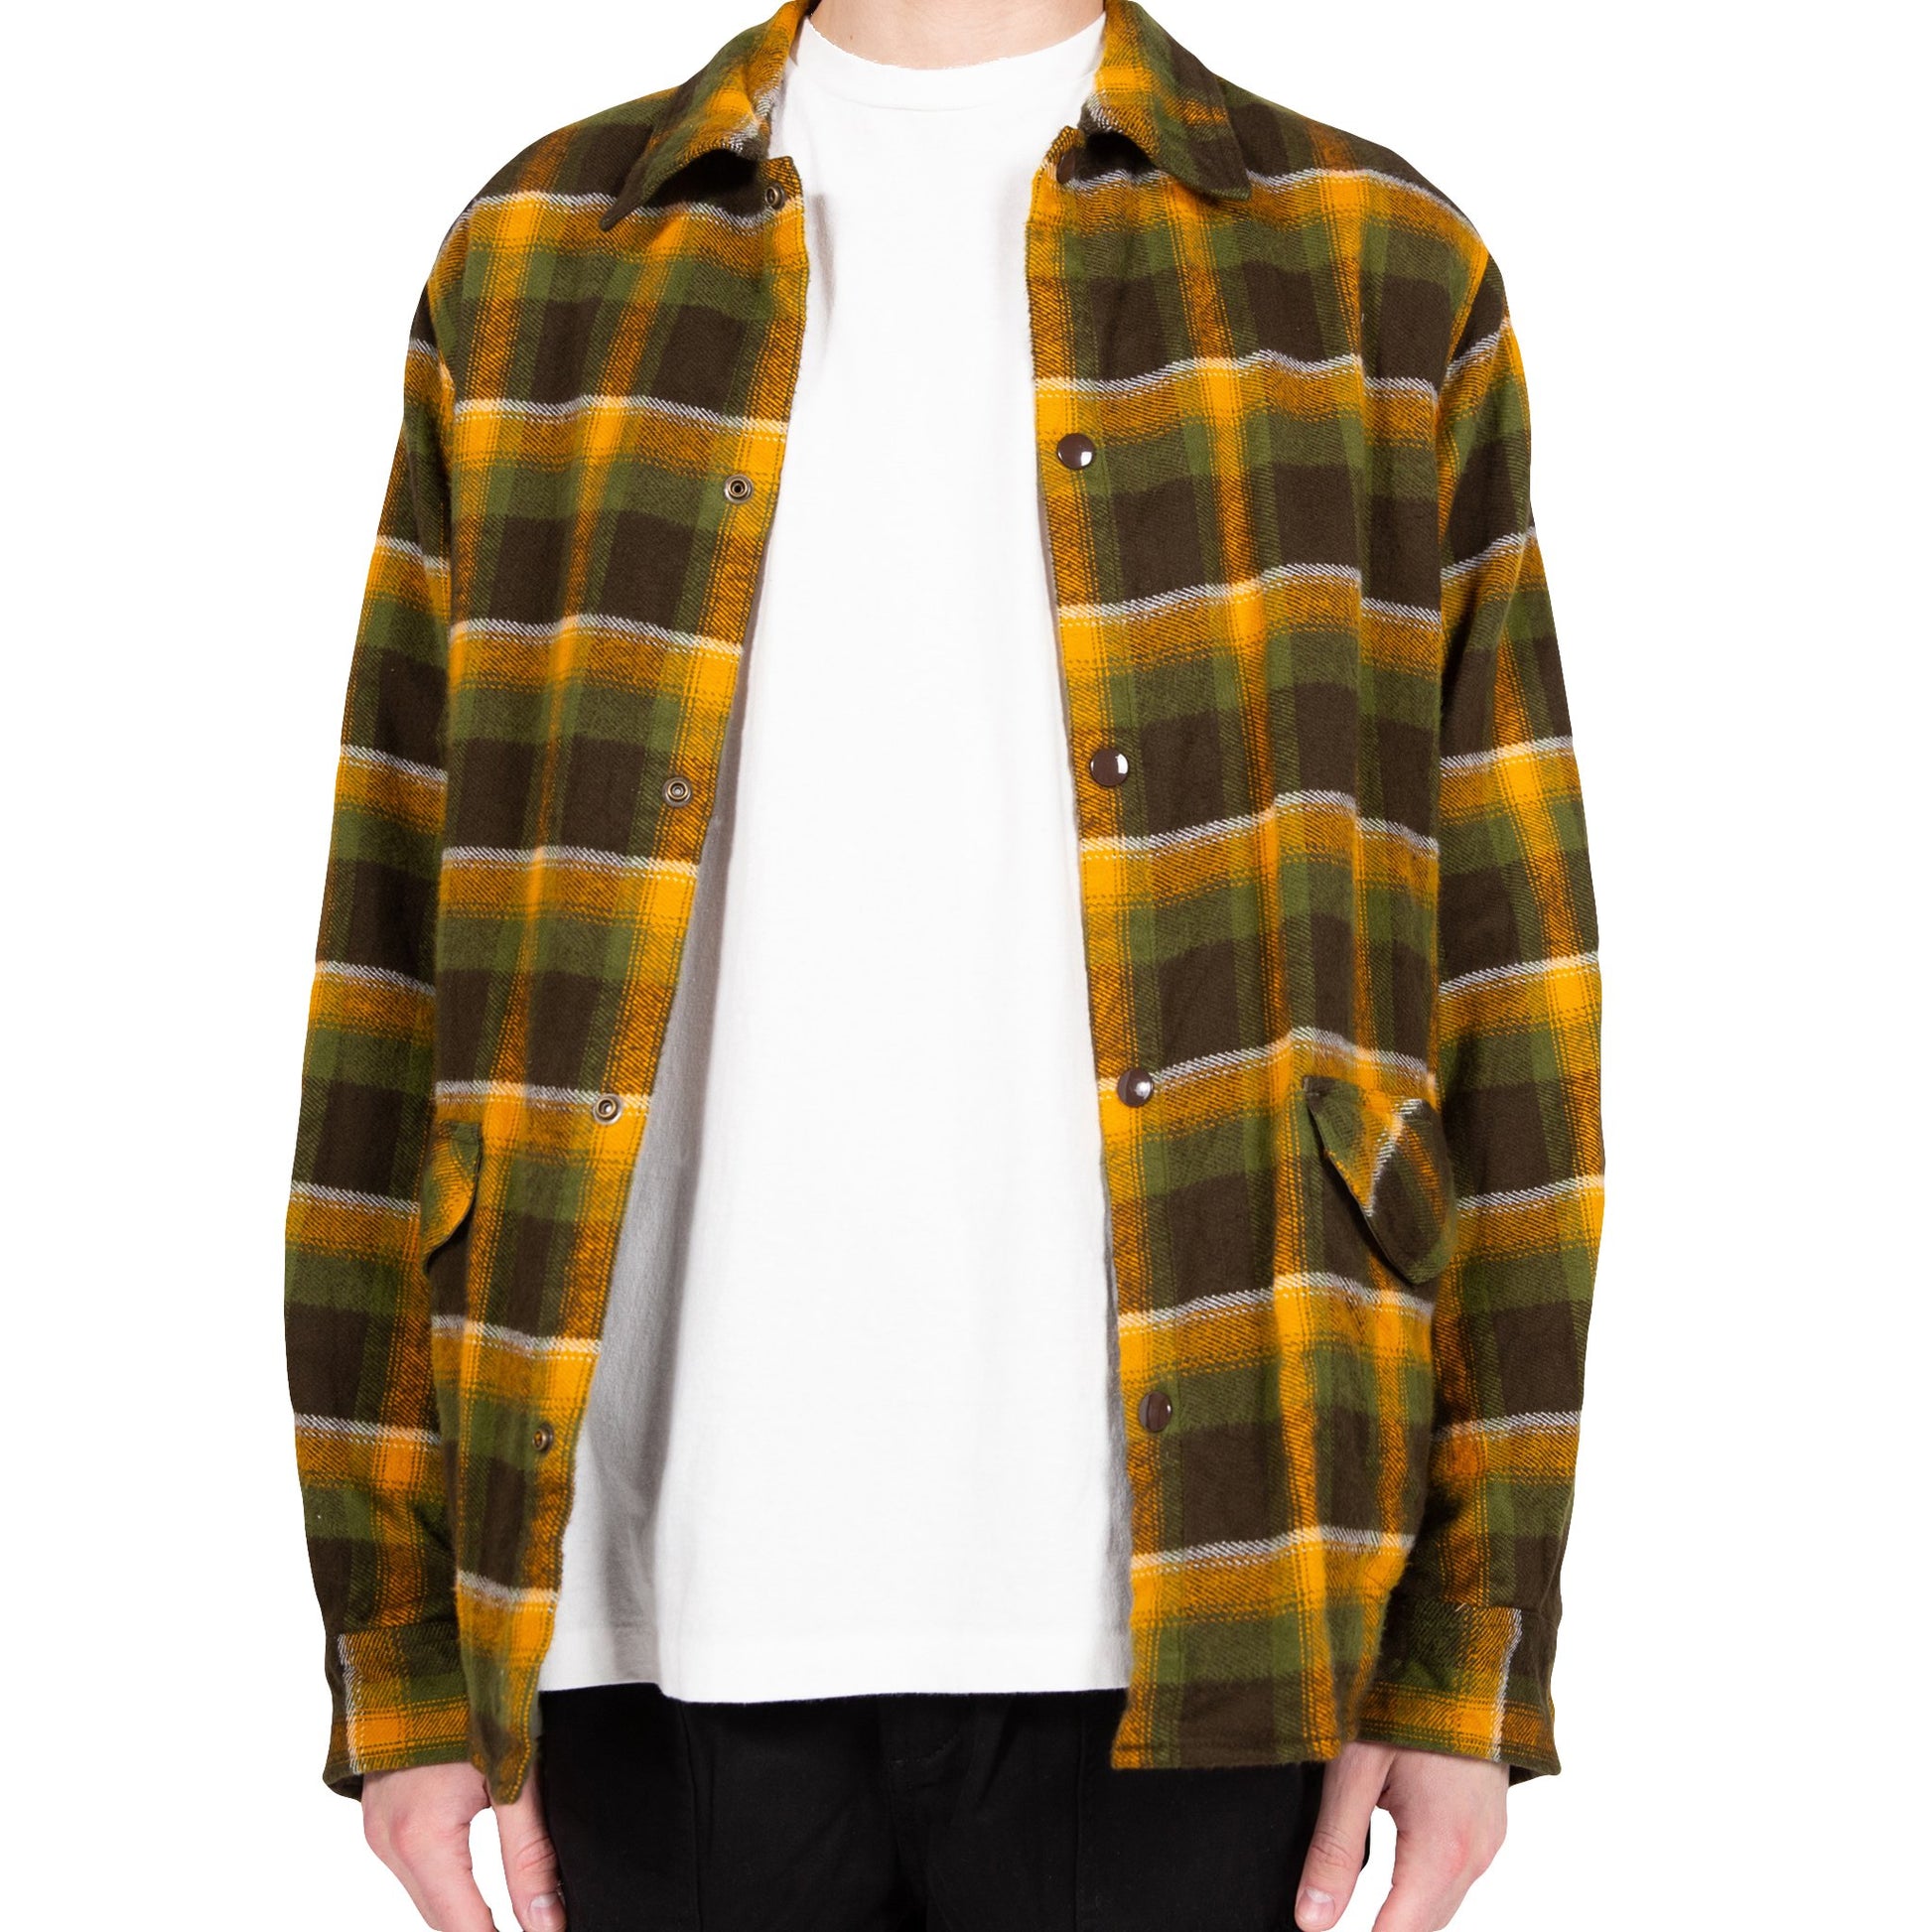 August Fifteenth Vermont Jacket Plaid Green Brown Yellow Front